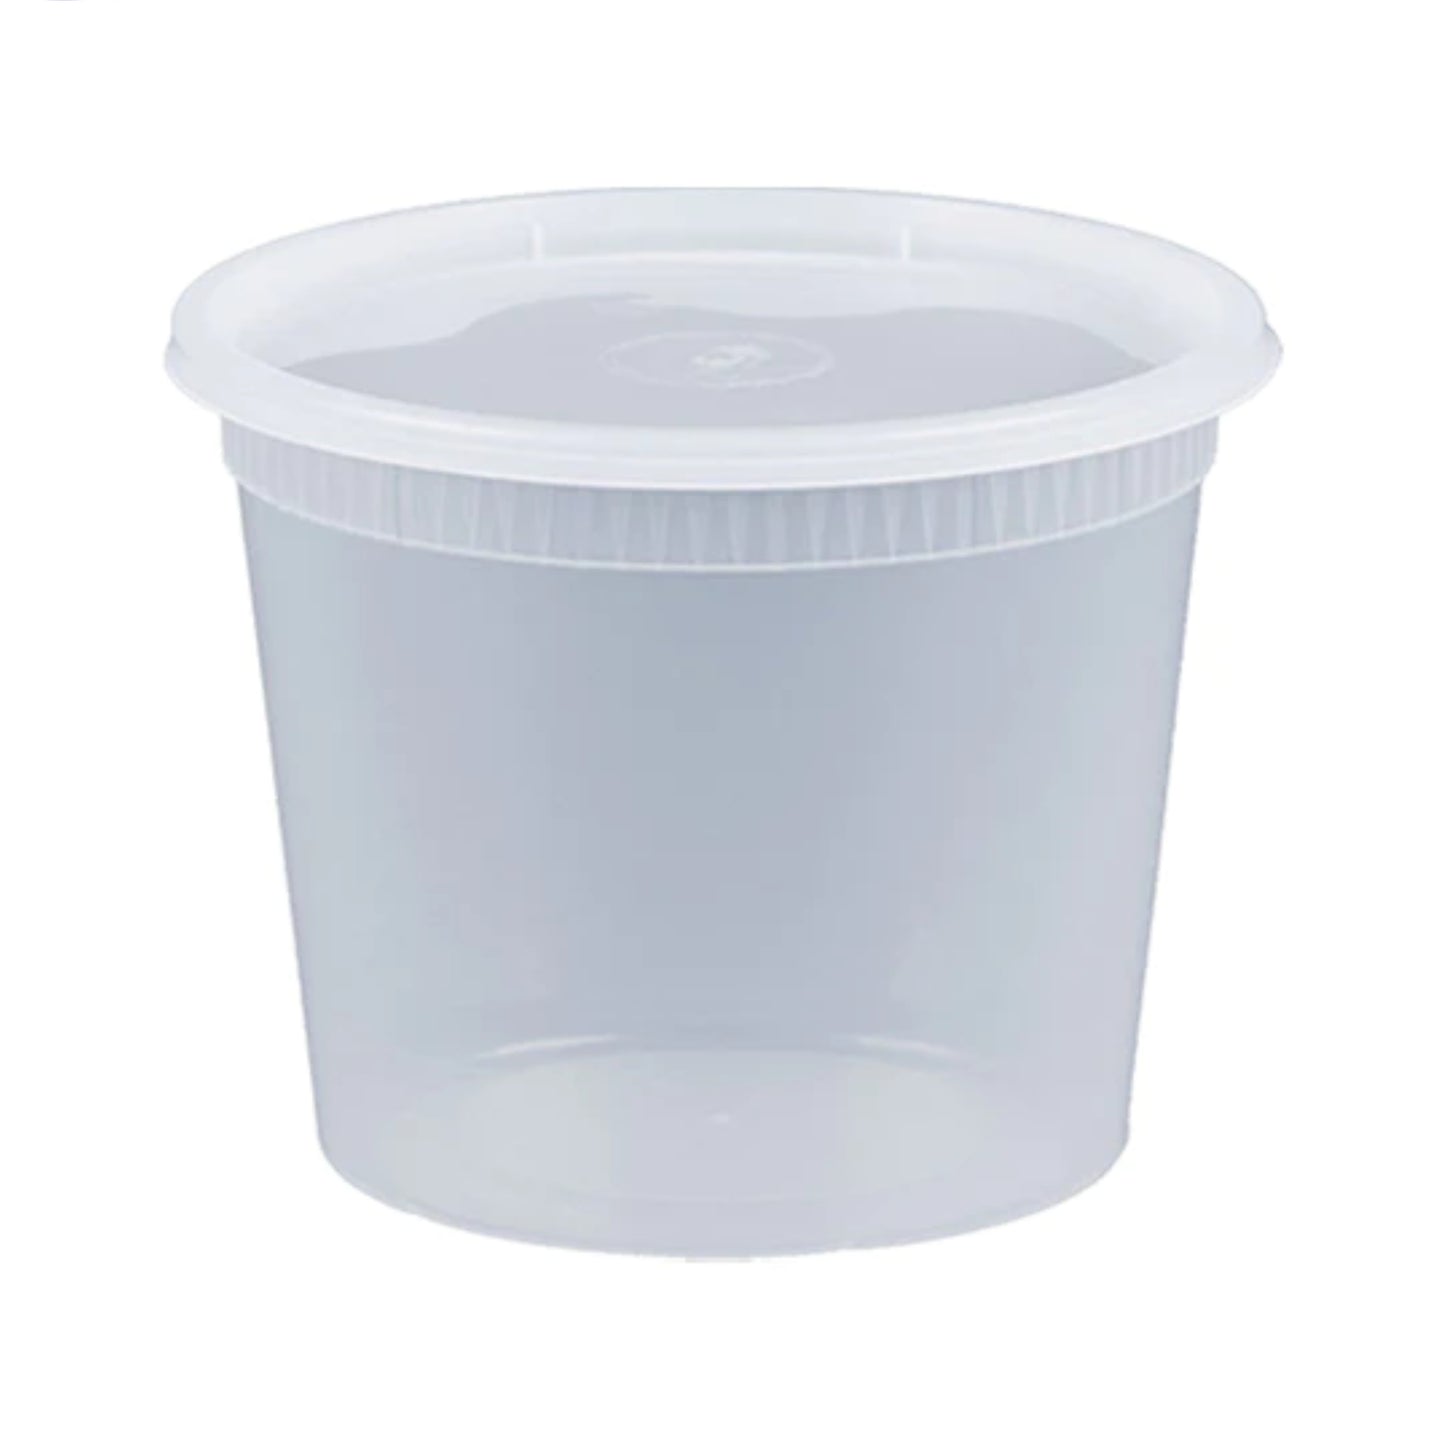 KIS-S24G | 240sets 24oz, 710ml Clear Plastic Deli Containers and Lids Combo; $0.187/set